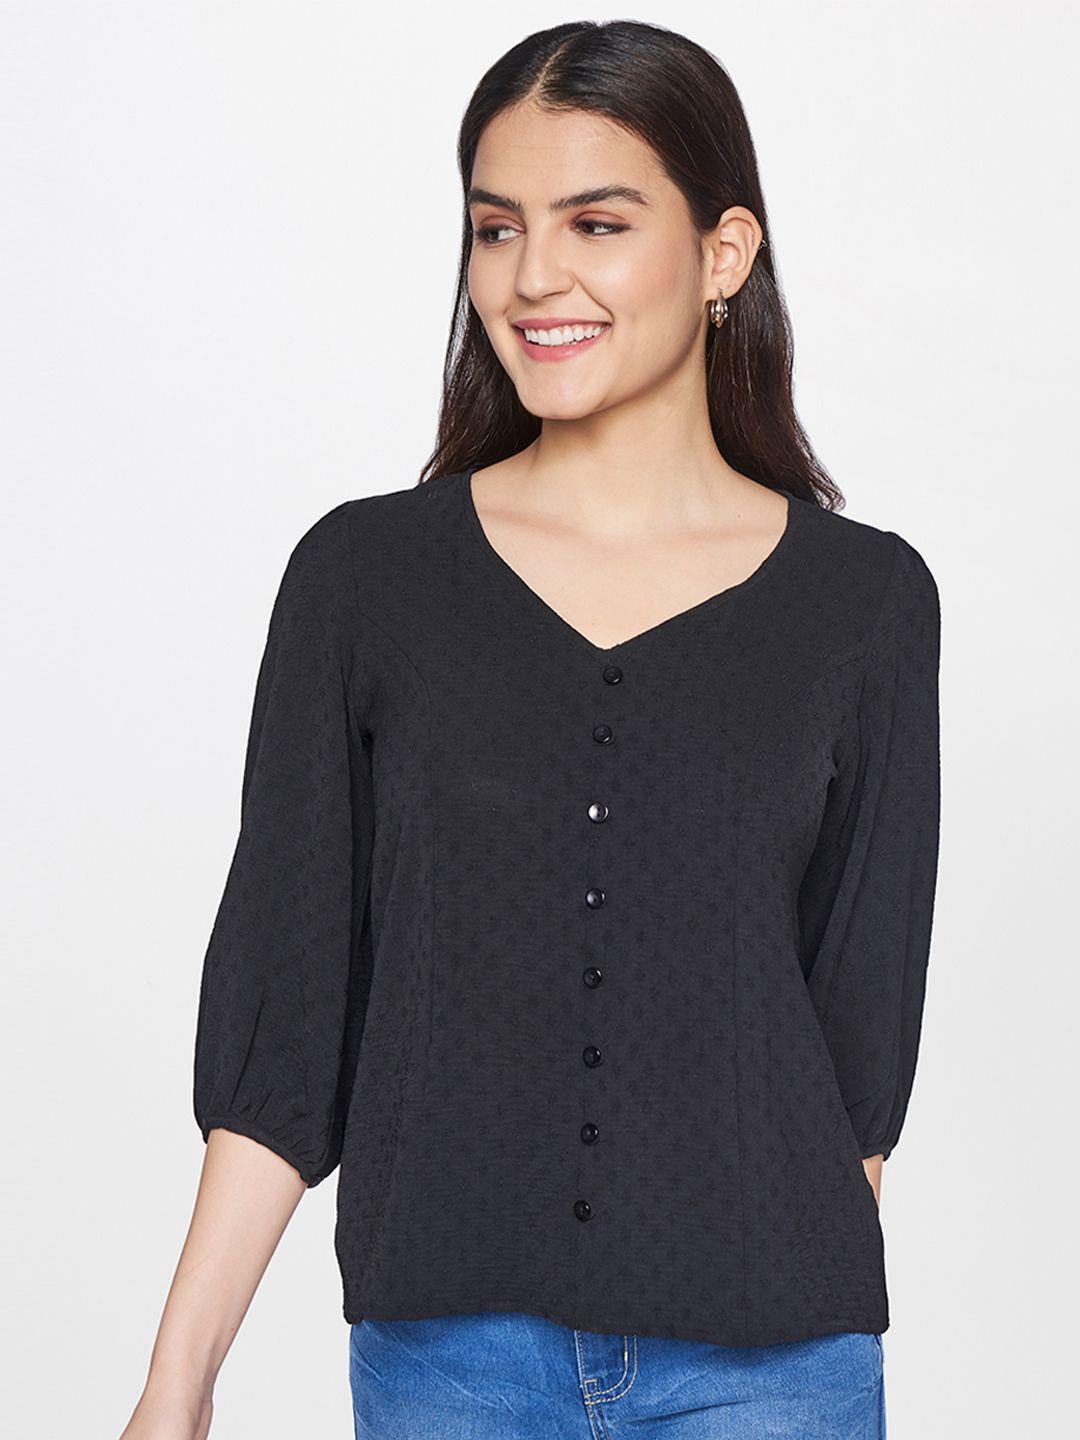 AND Black Embroidered Top